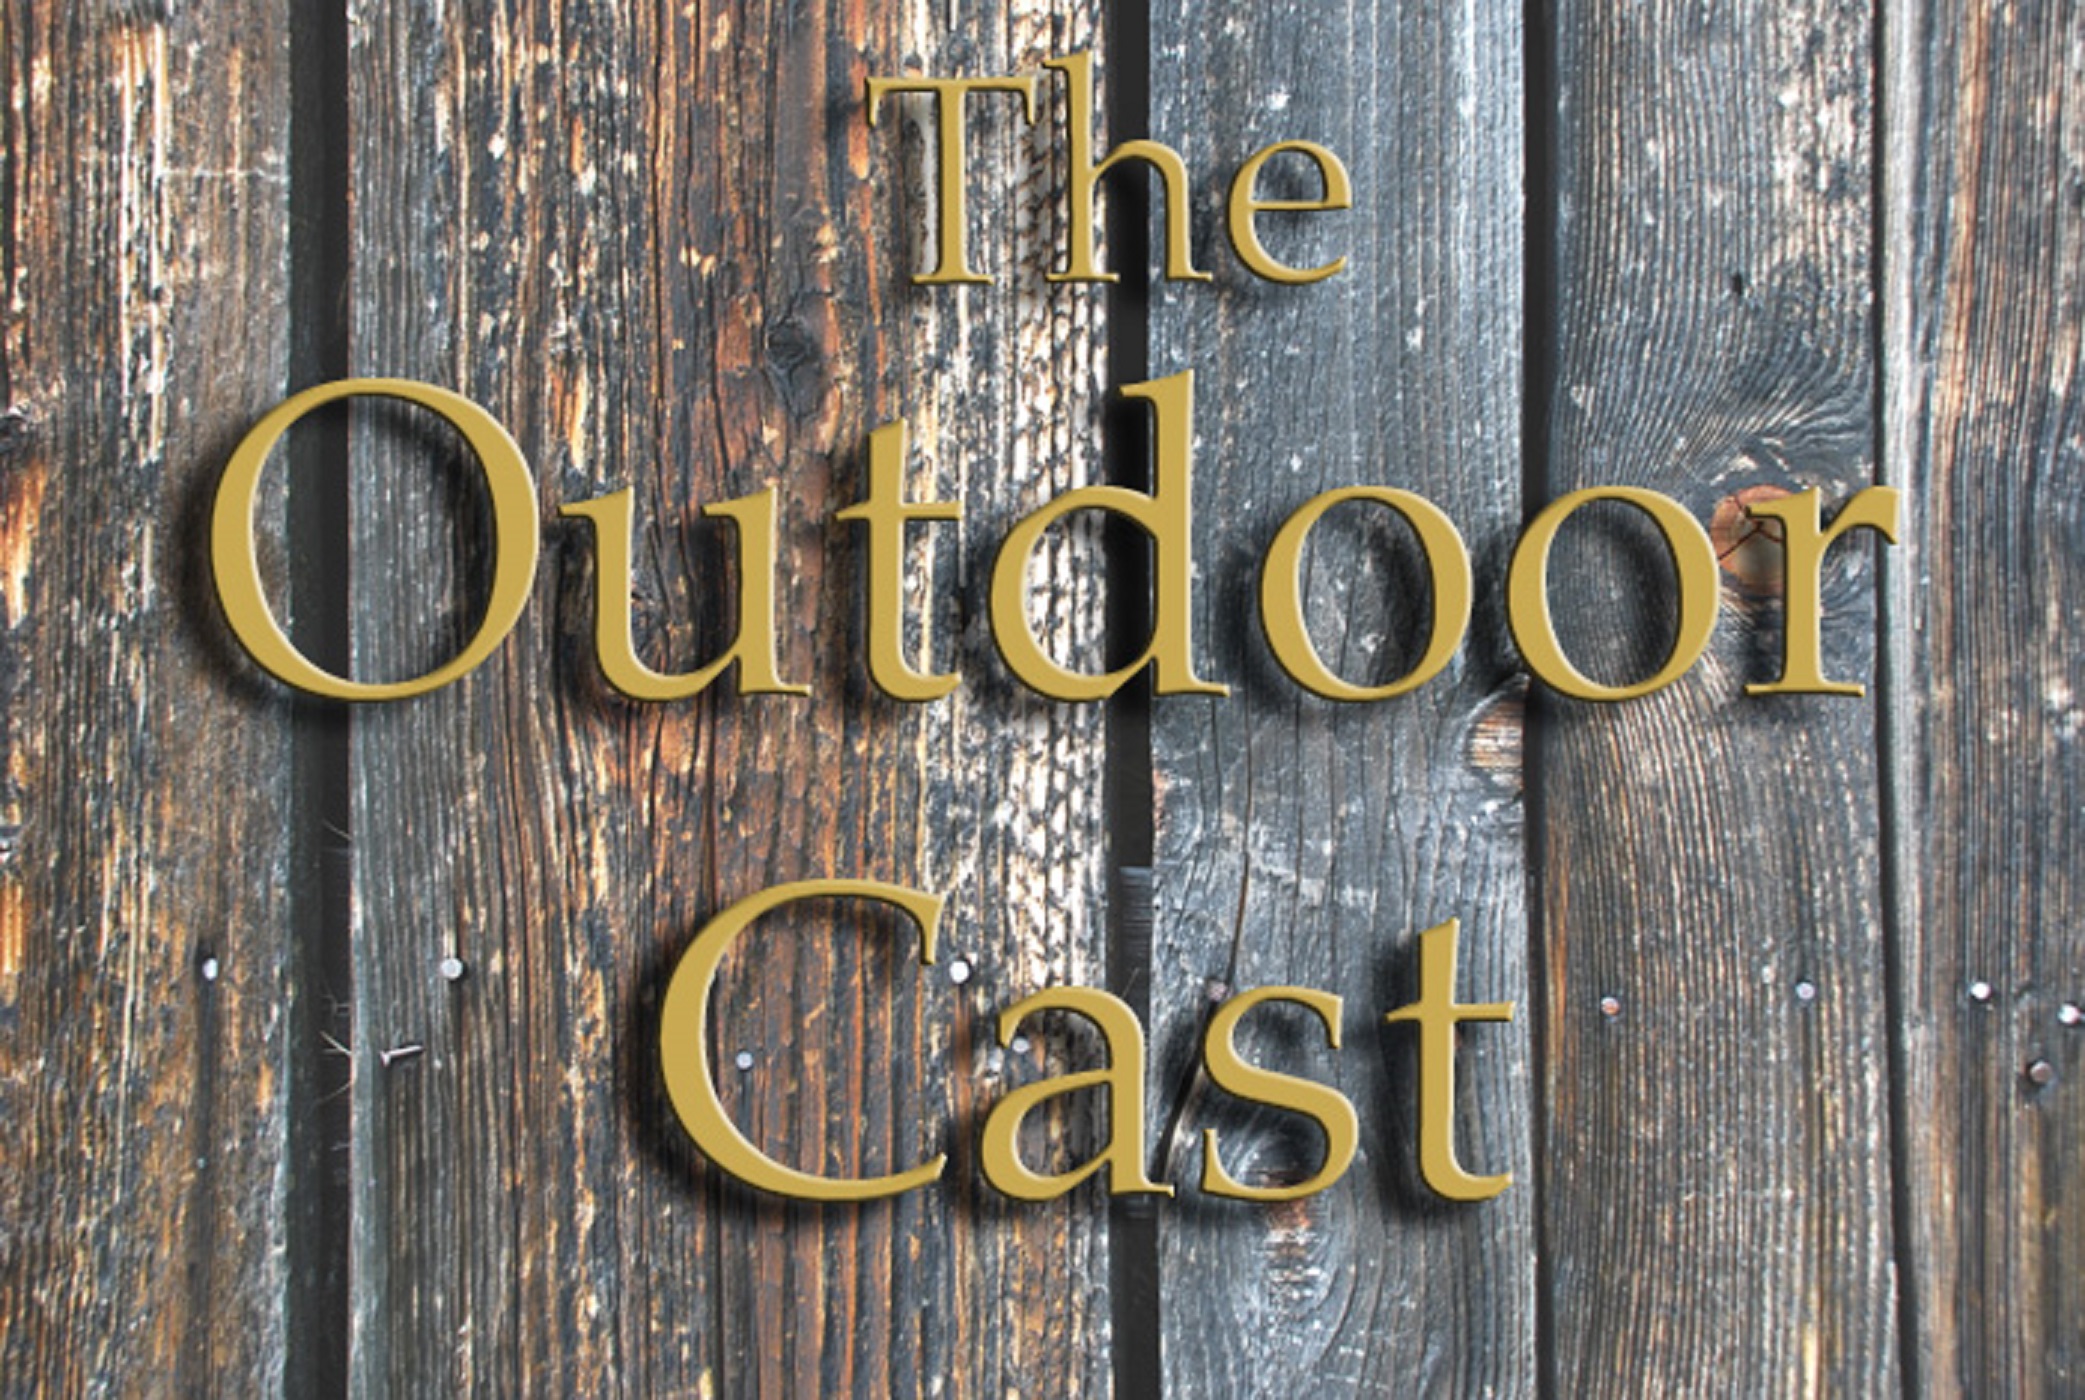 The Outdoor Cast